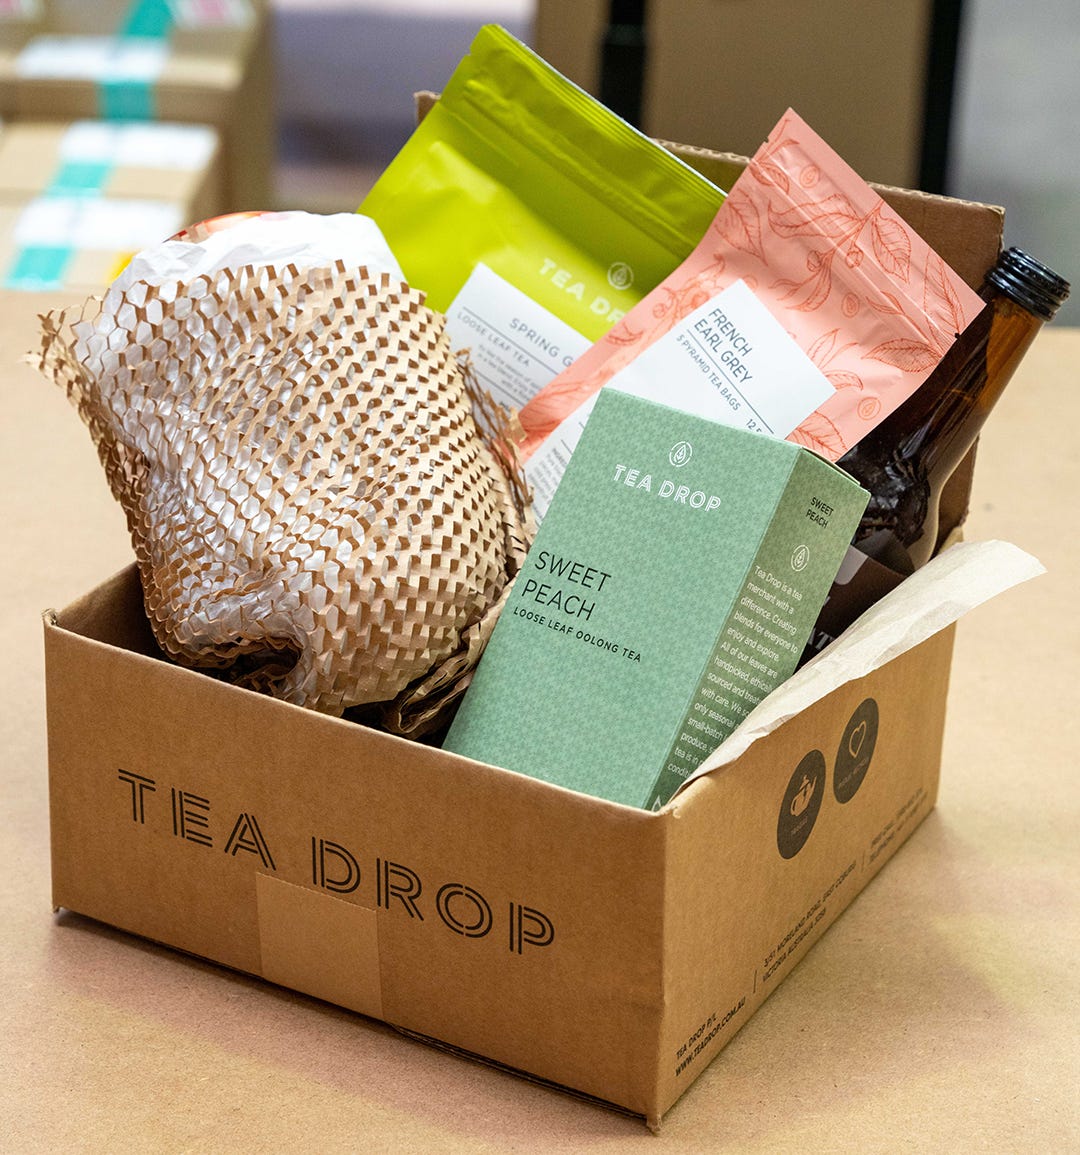 Tea Drop products in Carton with Signet Geami paper